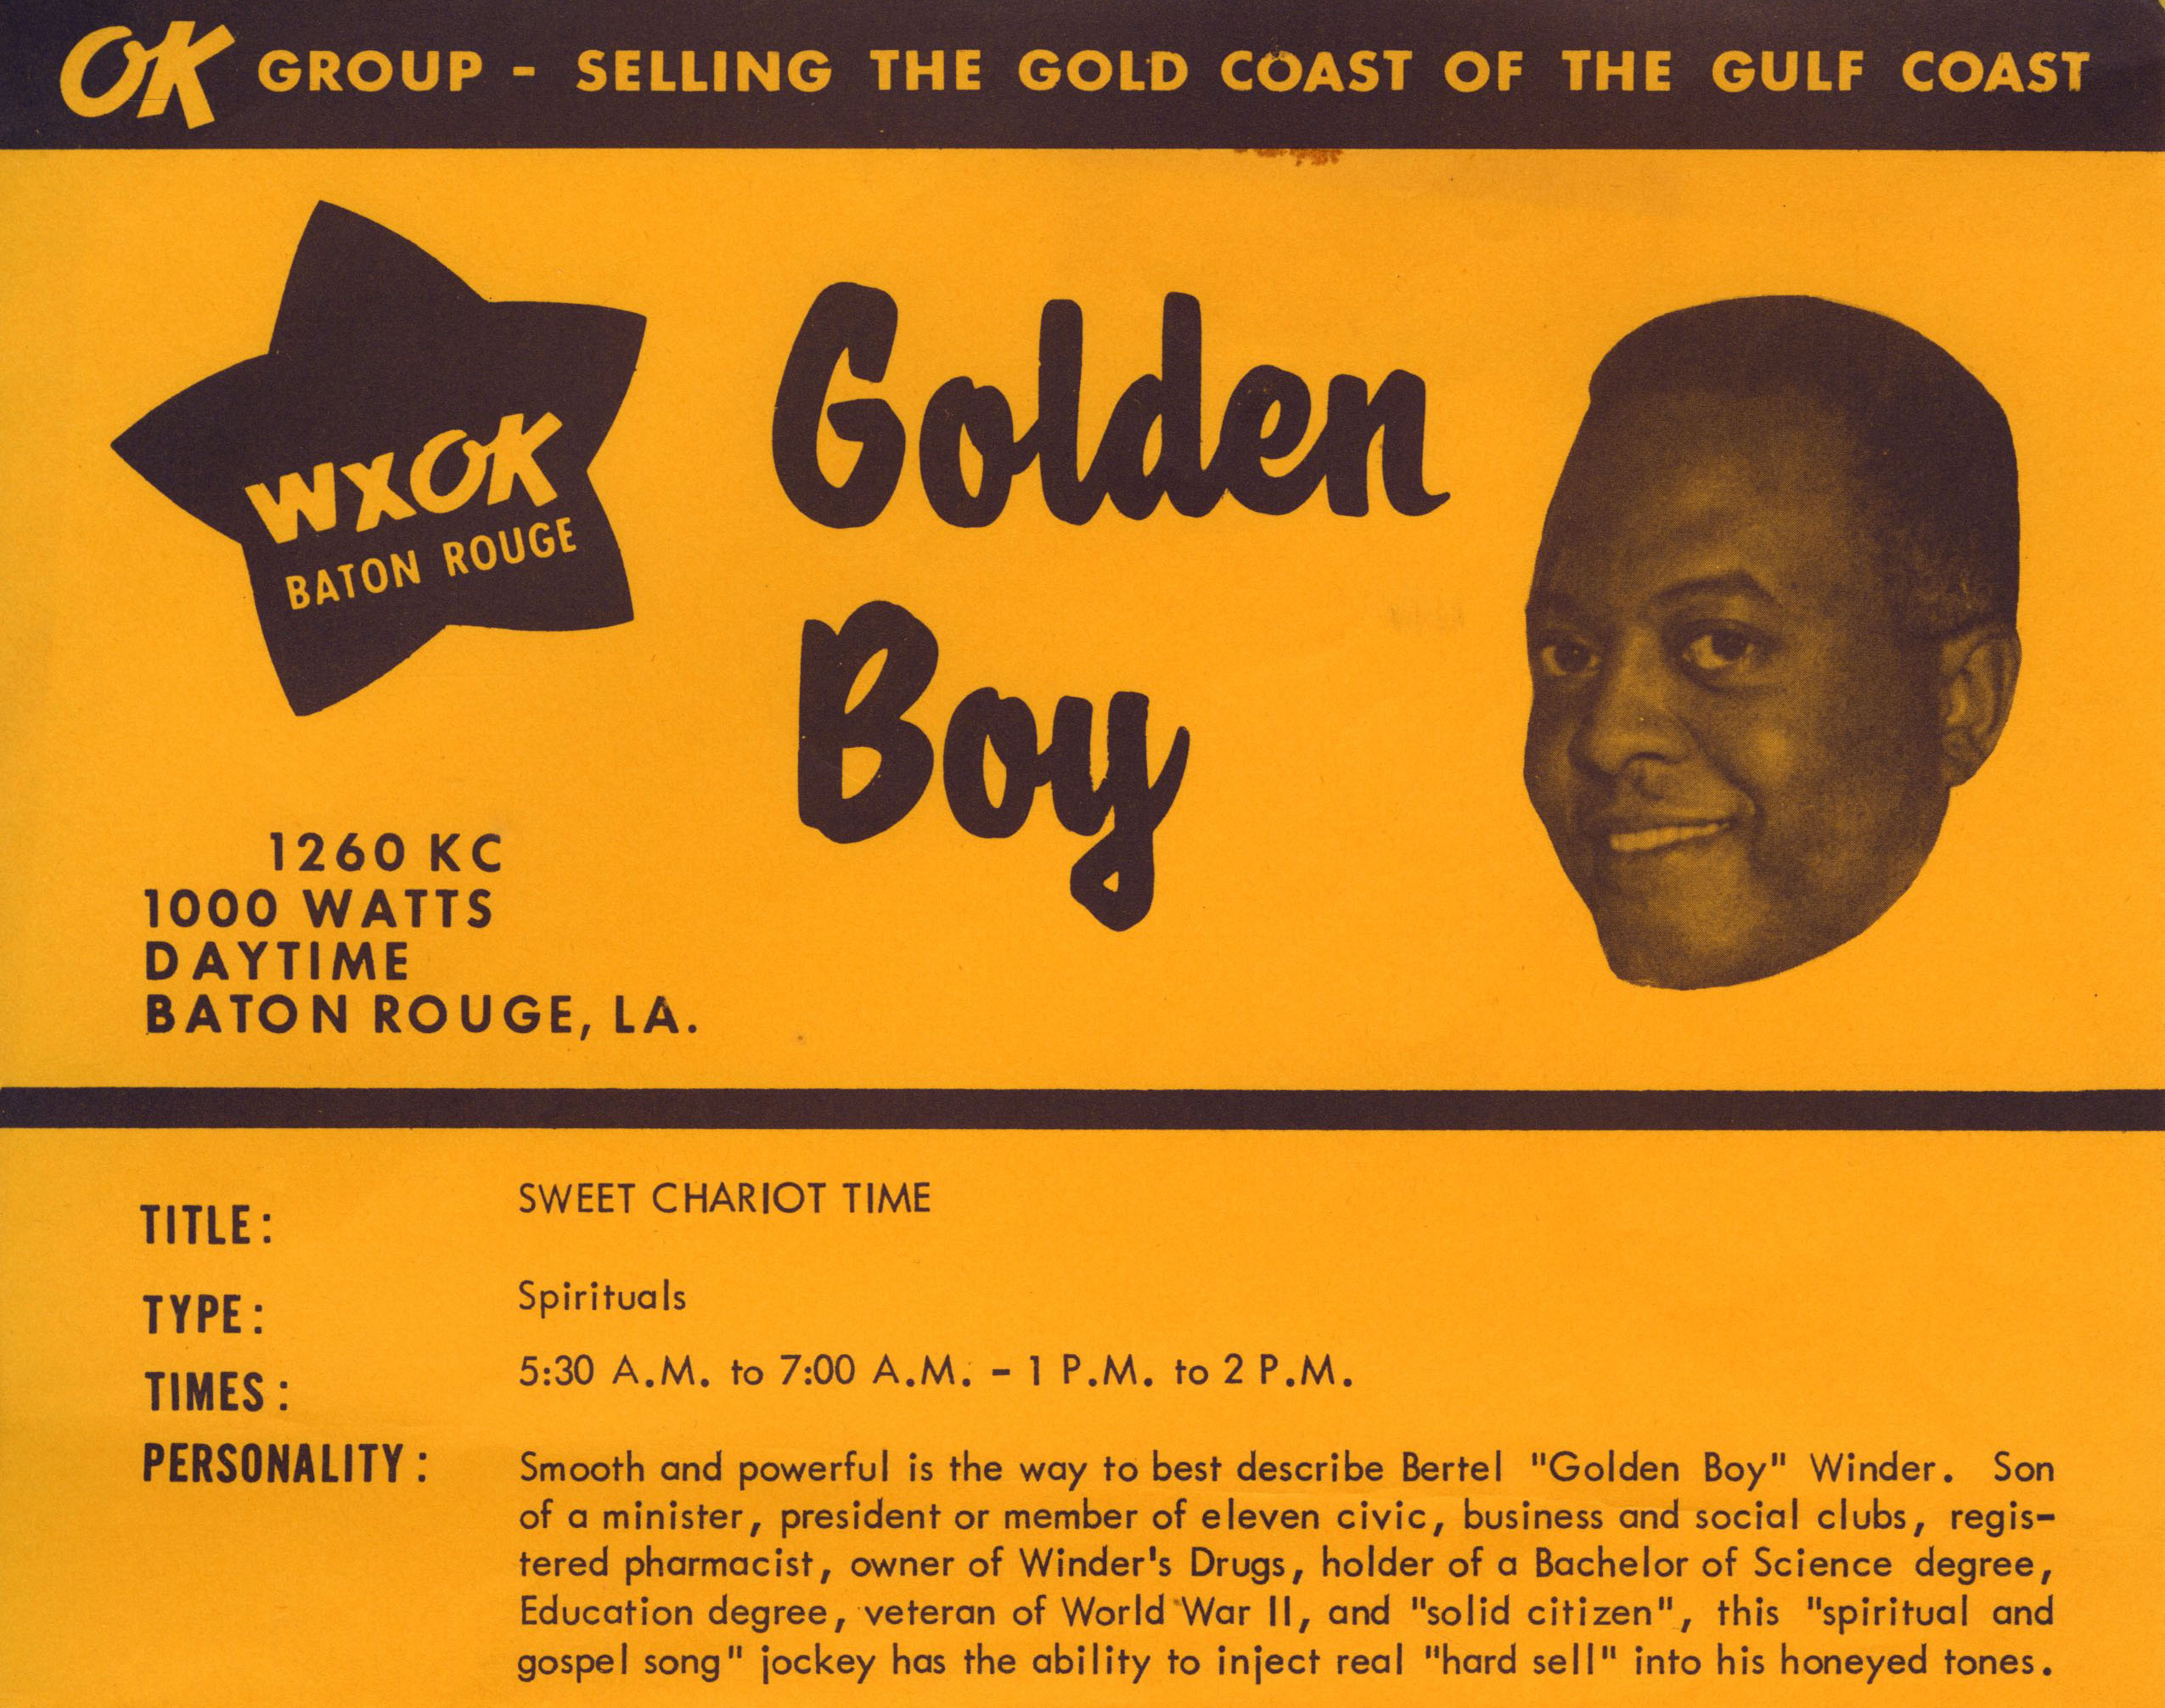 Detail of radio sales sheet for Golden Boy of WXOK AM Baton Rouge, circa 1950s-1960s, Jules J. Paglin collection of OK Group records (HJA-067), Tulane University Special Collections.